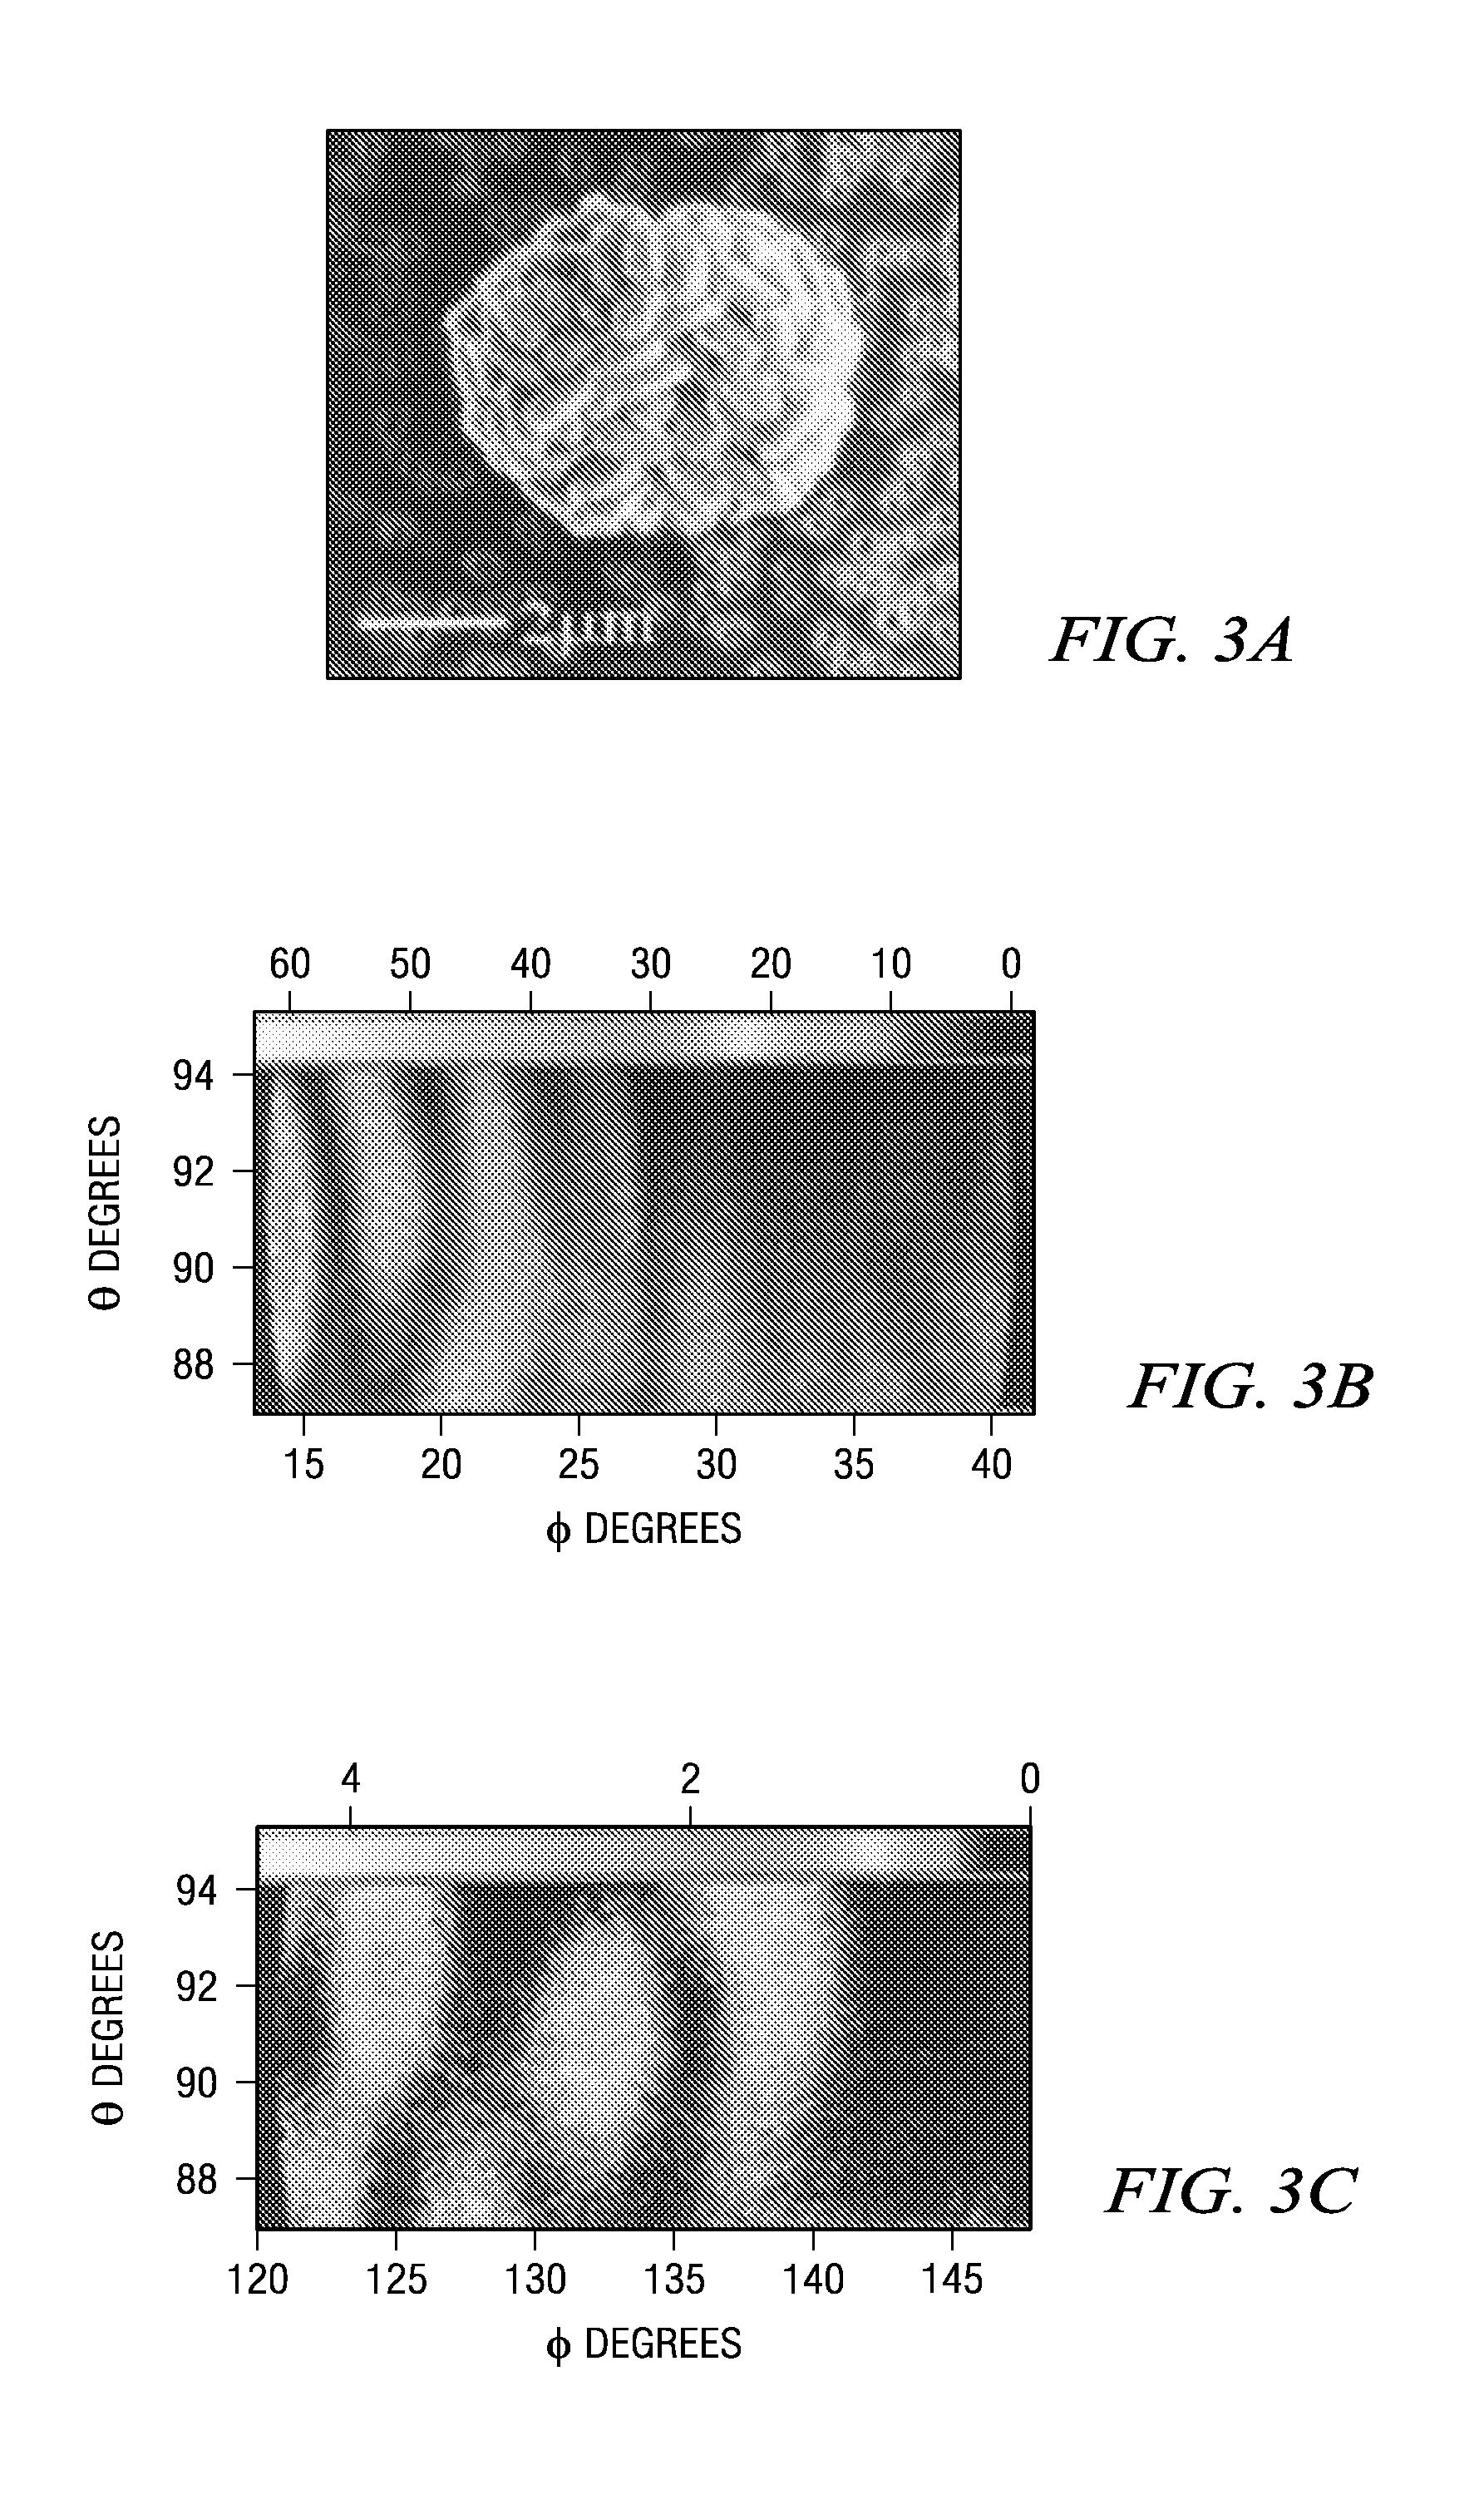 Systems and methods for detecting normal levels of bacteria in water using a multiple angle light scattering (MALS) instrument